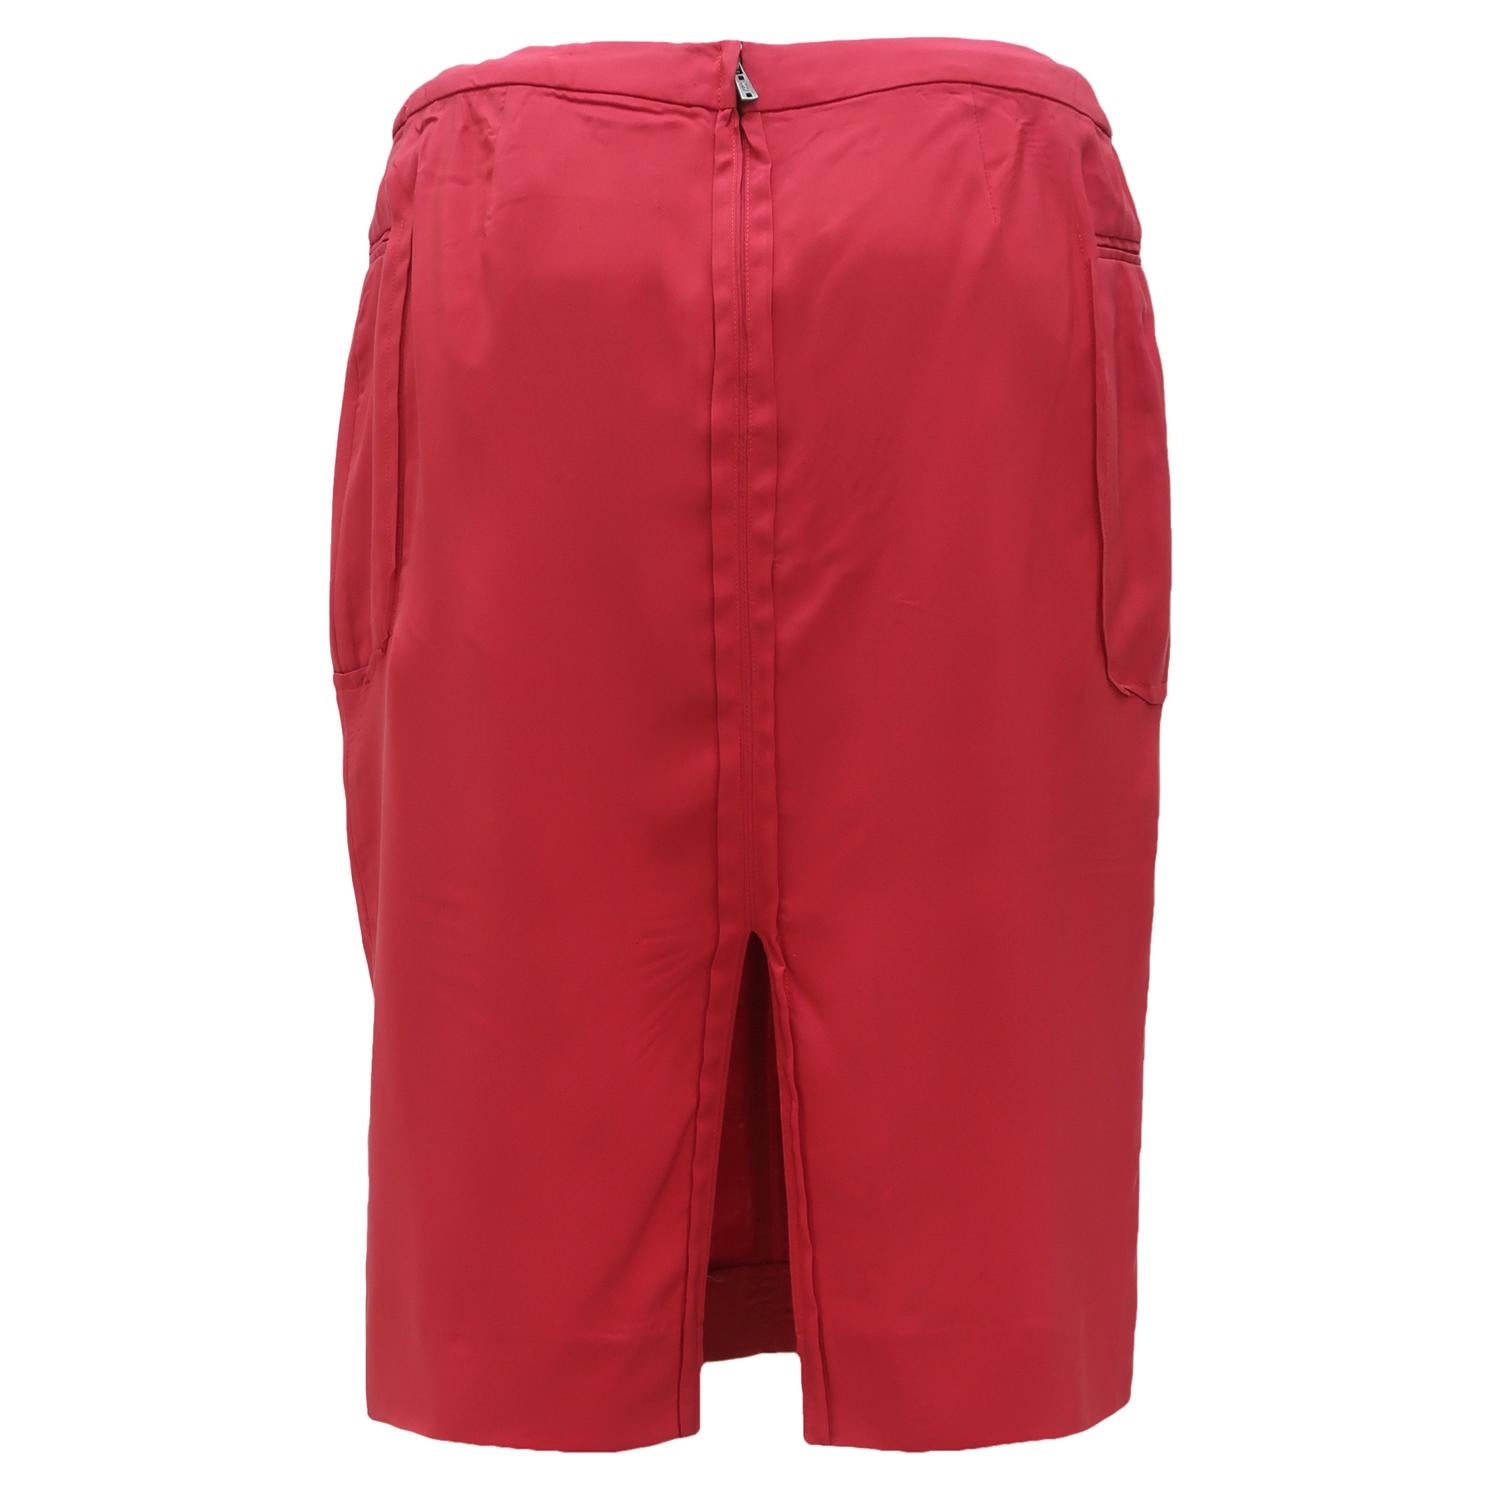 Straight skirts are a Saint Laurent staple and they were famously worn with broad shouldered blazers or pussy-bow blouses from the late 1970s to the early 1990s. This unusual red skirt plays with the menswear idea and also hints at sartorial